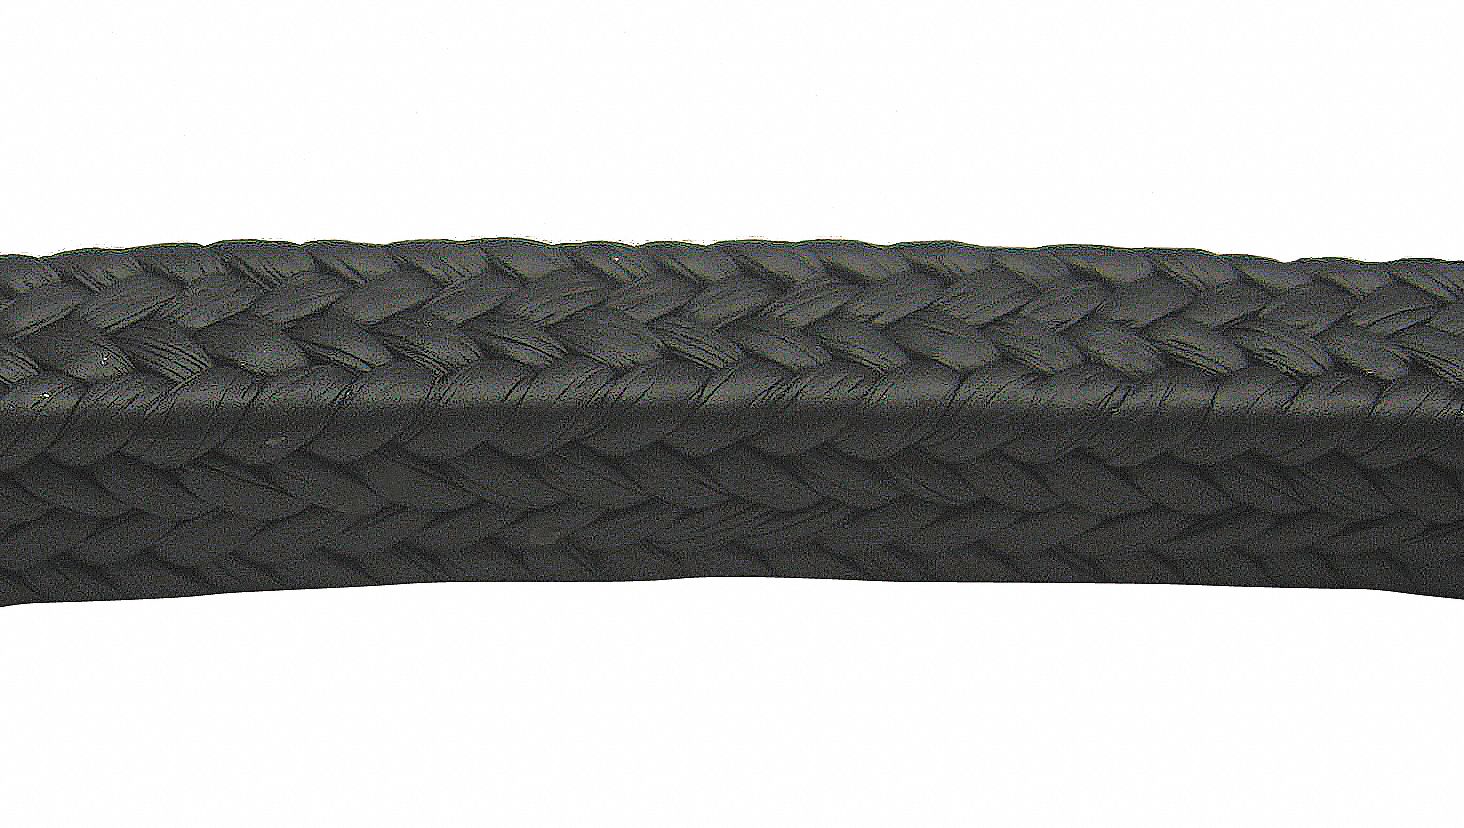 Dull Black 10 Length 5/16 Square 10' Length 631A-13590101 Palmetto 1359 Series Expanded PTFE with Graphite and Aramid Corners Compression Packing Seal 5/16 Square 